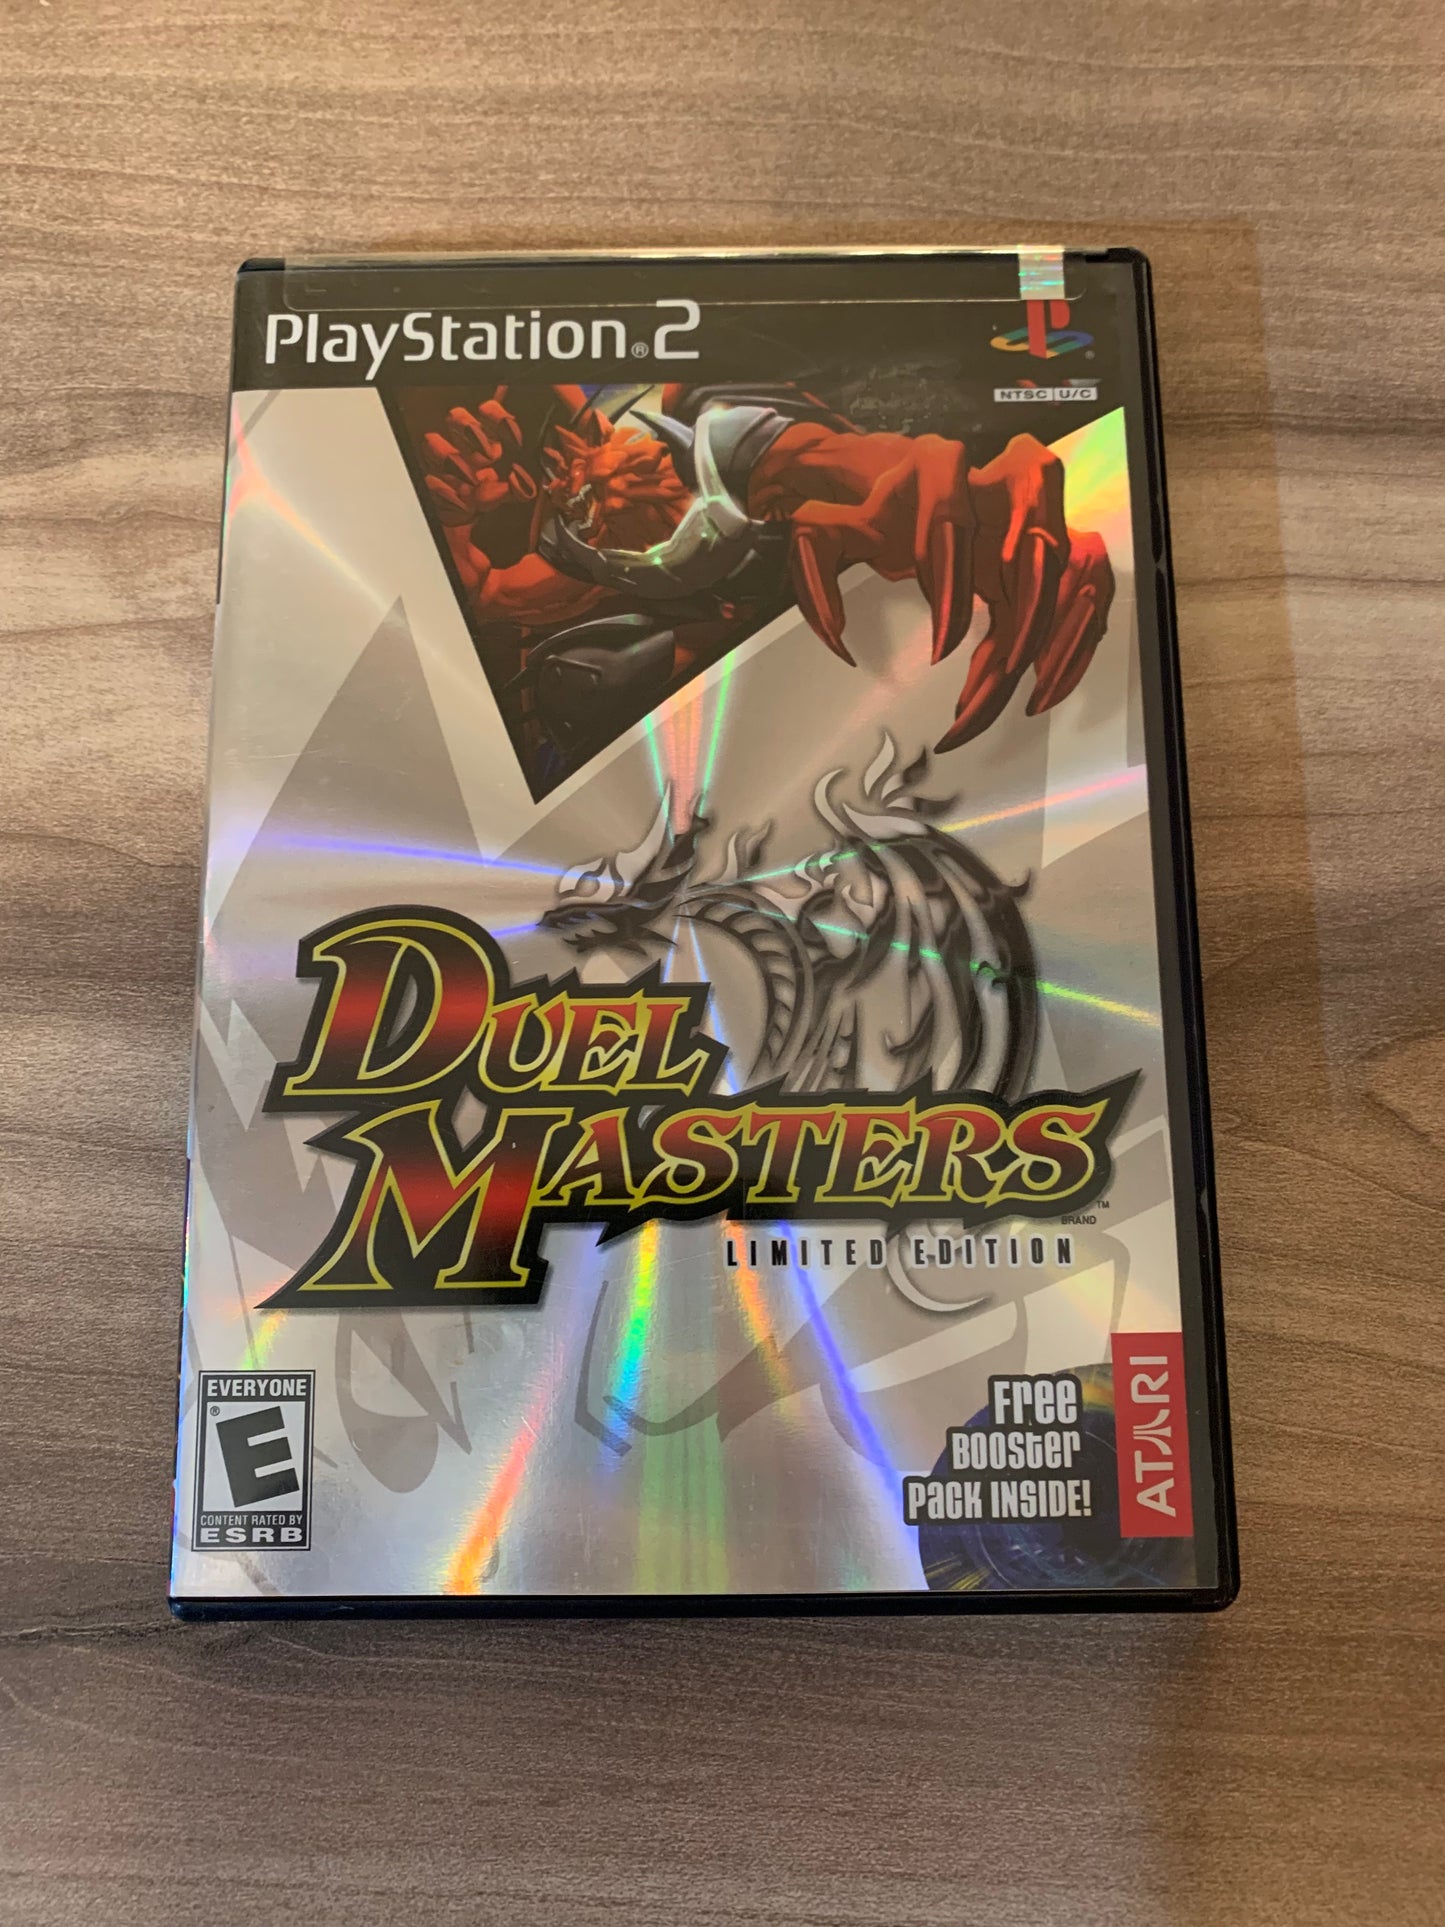 SONY PLAYSTATiON 2 [PS2] | DUEL MASTERS | LiMiTED EDiTiON